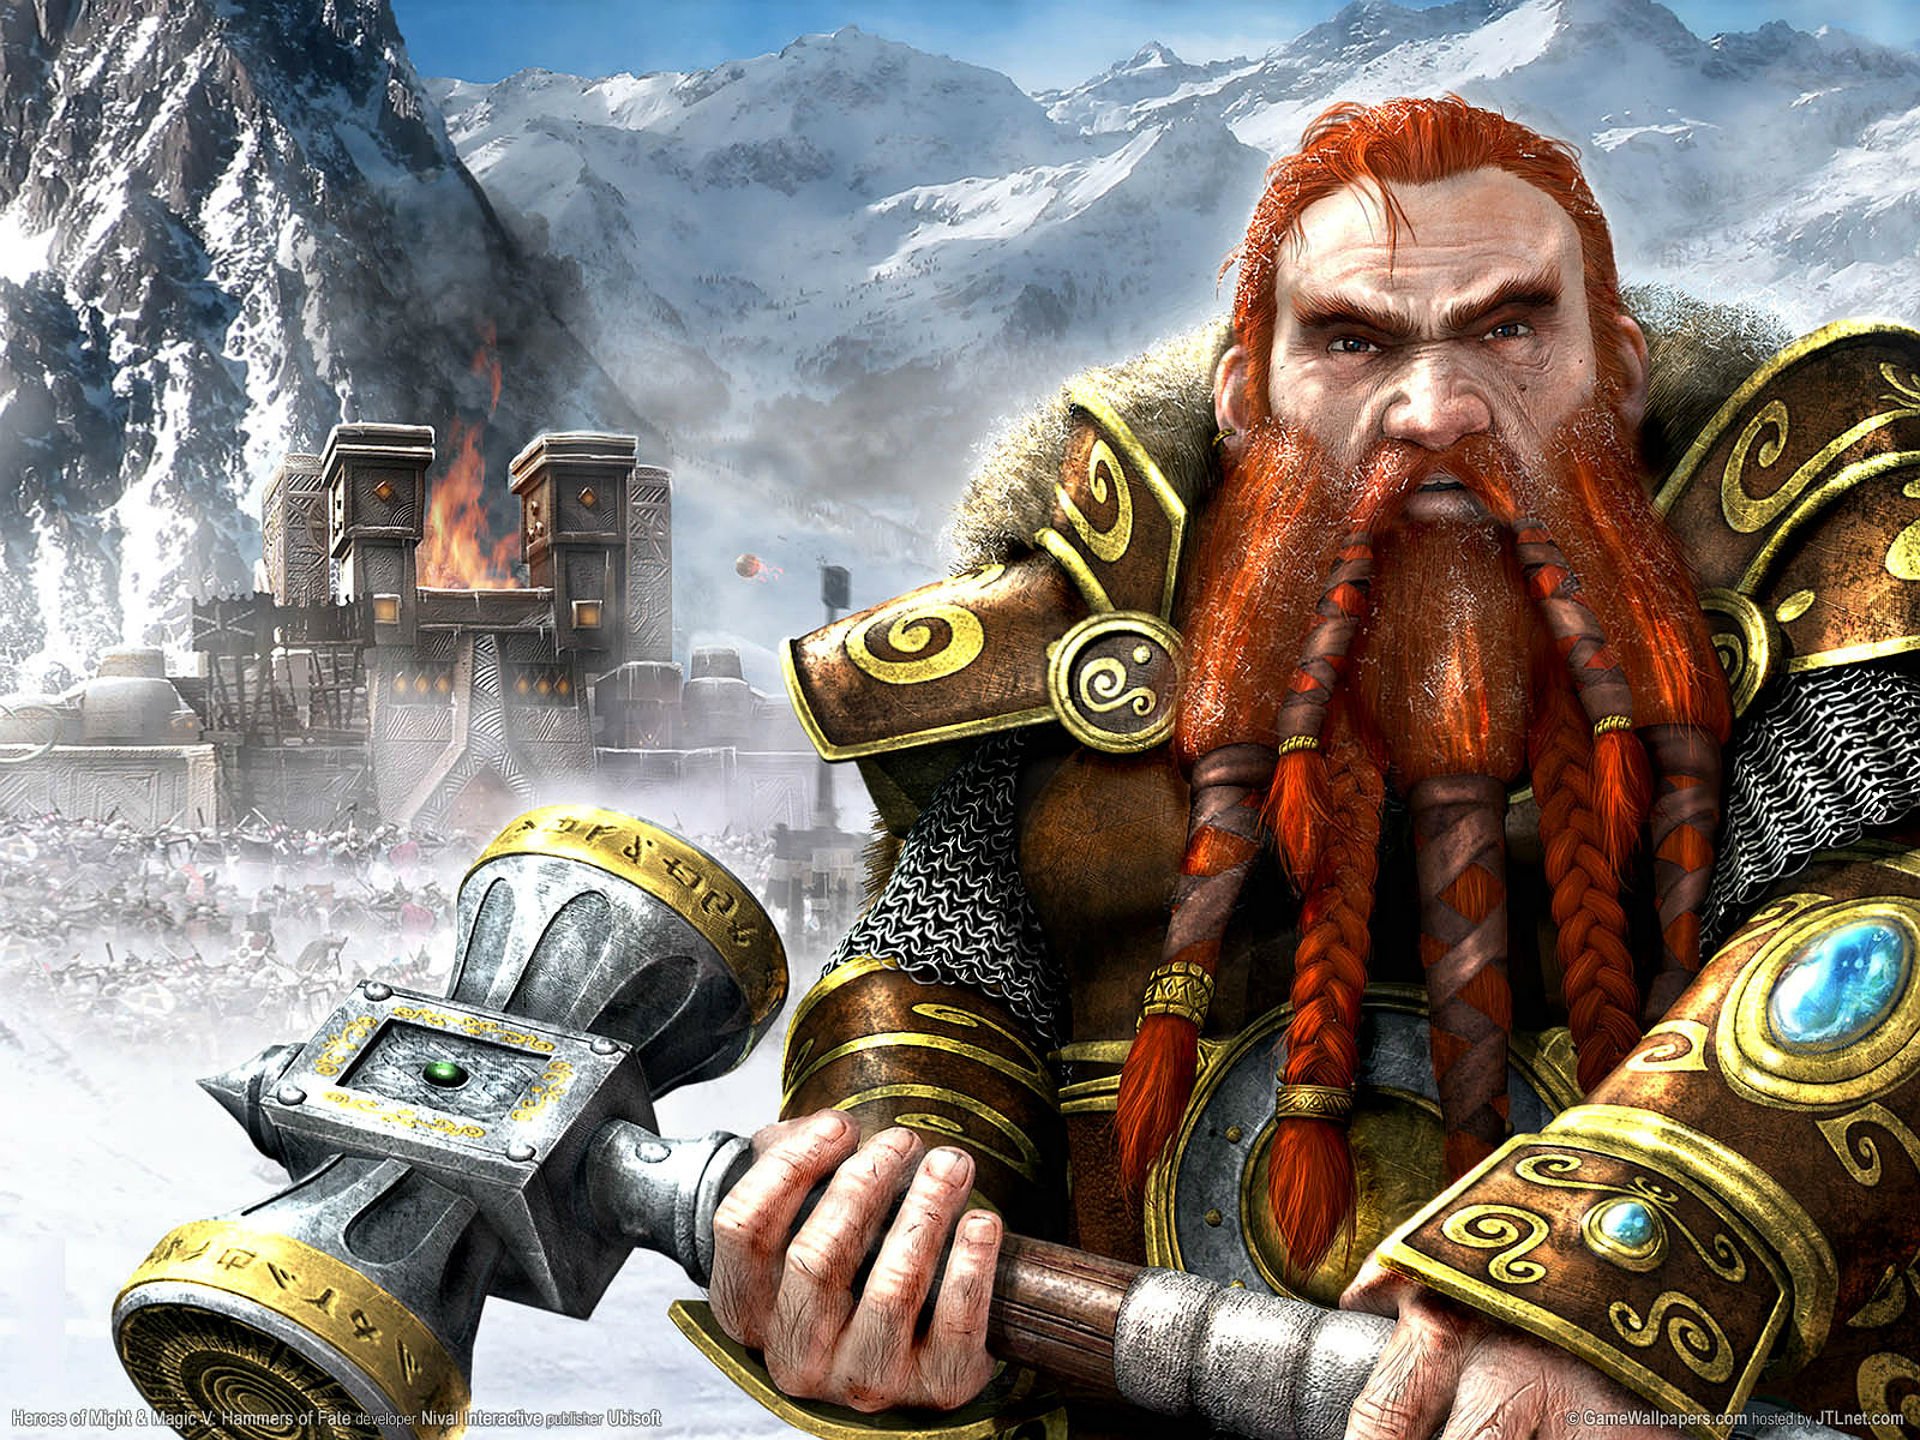 heroes, Might, Magic, Strategy, Fantasy, Fighting, Adventure, Action, Online, 1hmm, Warrior, Dwarf, Castle Wallpaper